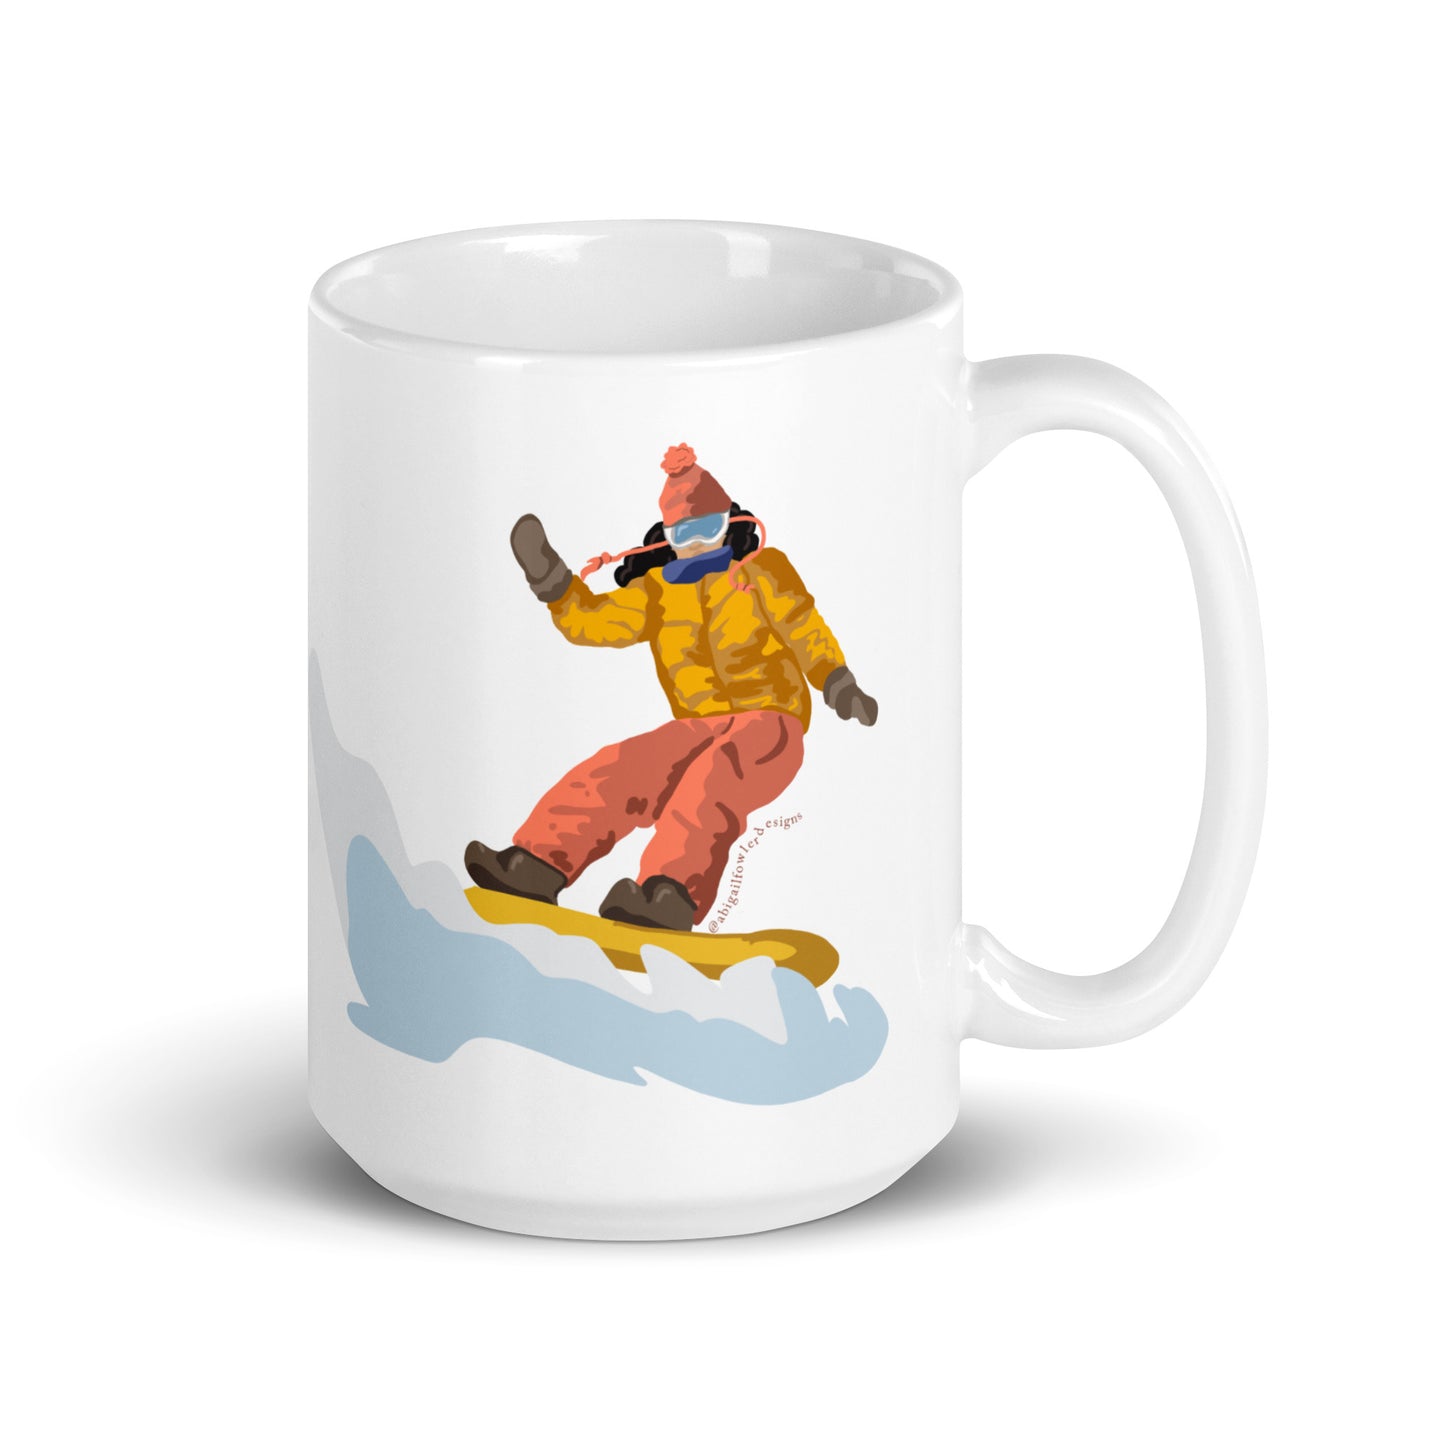 Tan and Curly Brunette Snowboarder White glossy mug